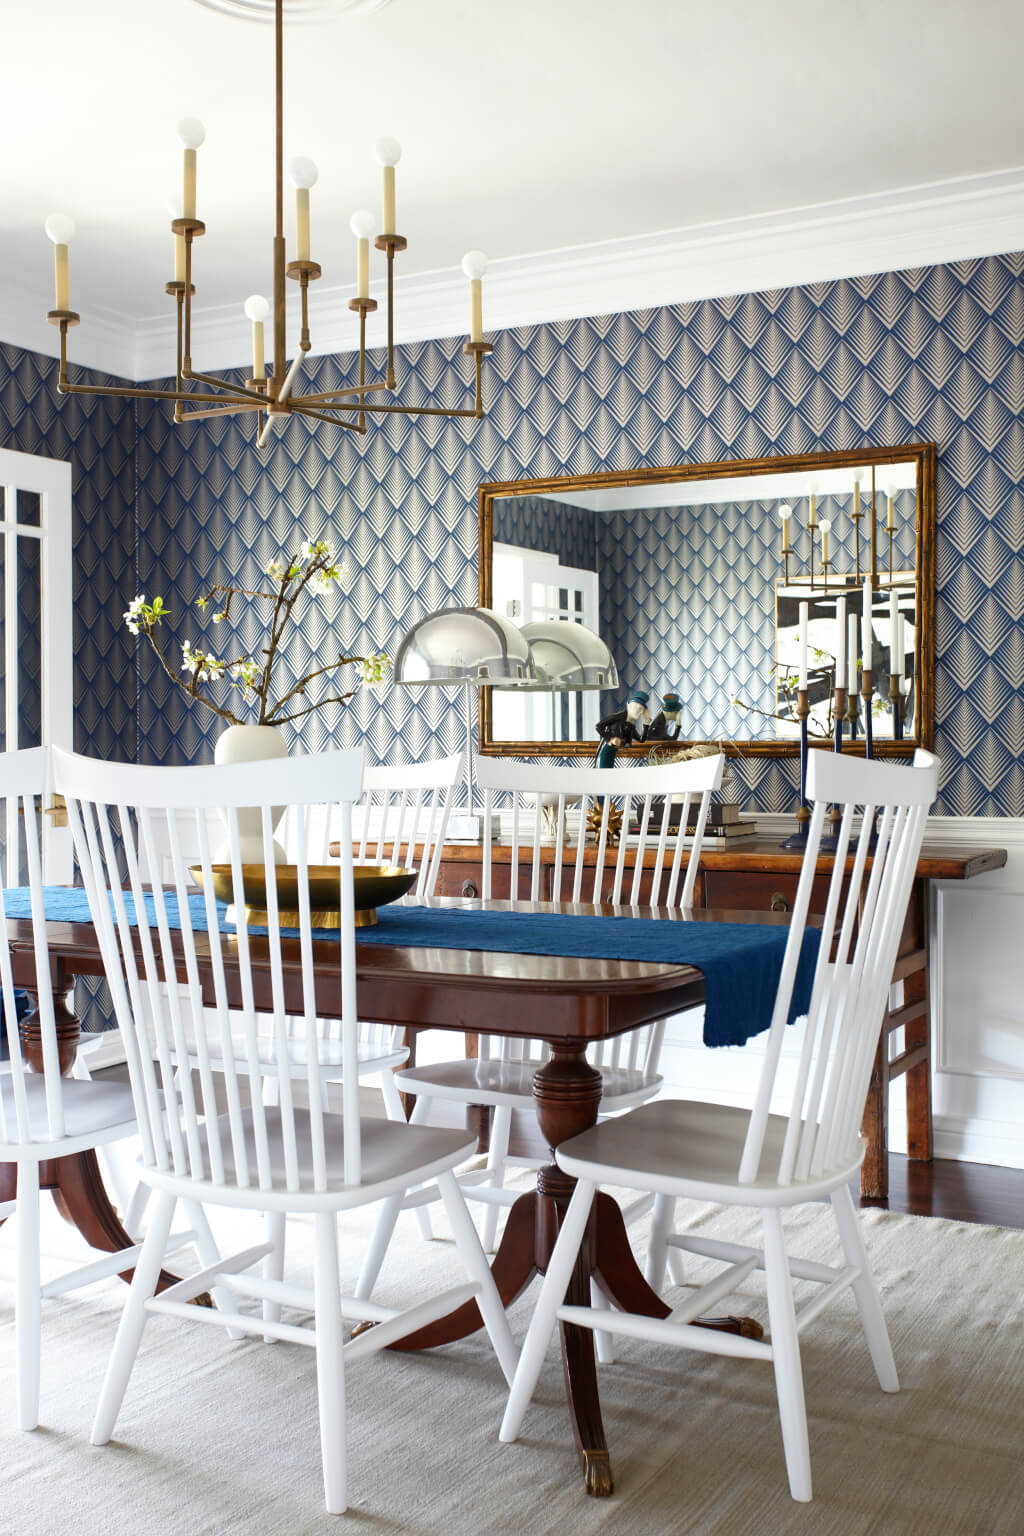 Dining Room Rules The Cheat Sheet You've Been Waiting For 1